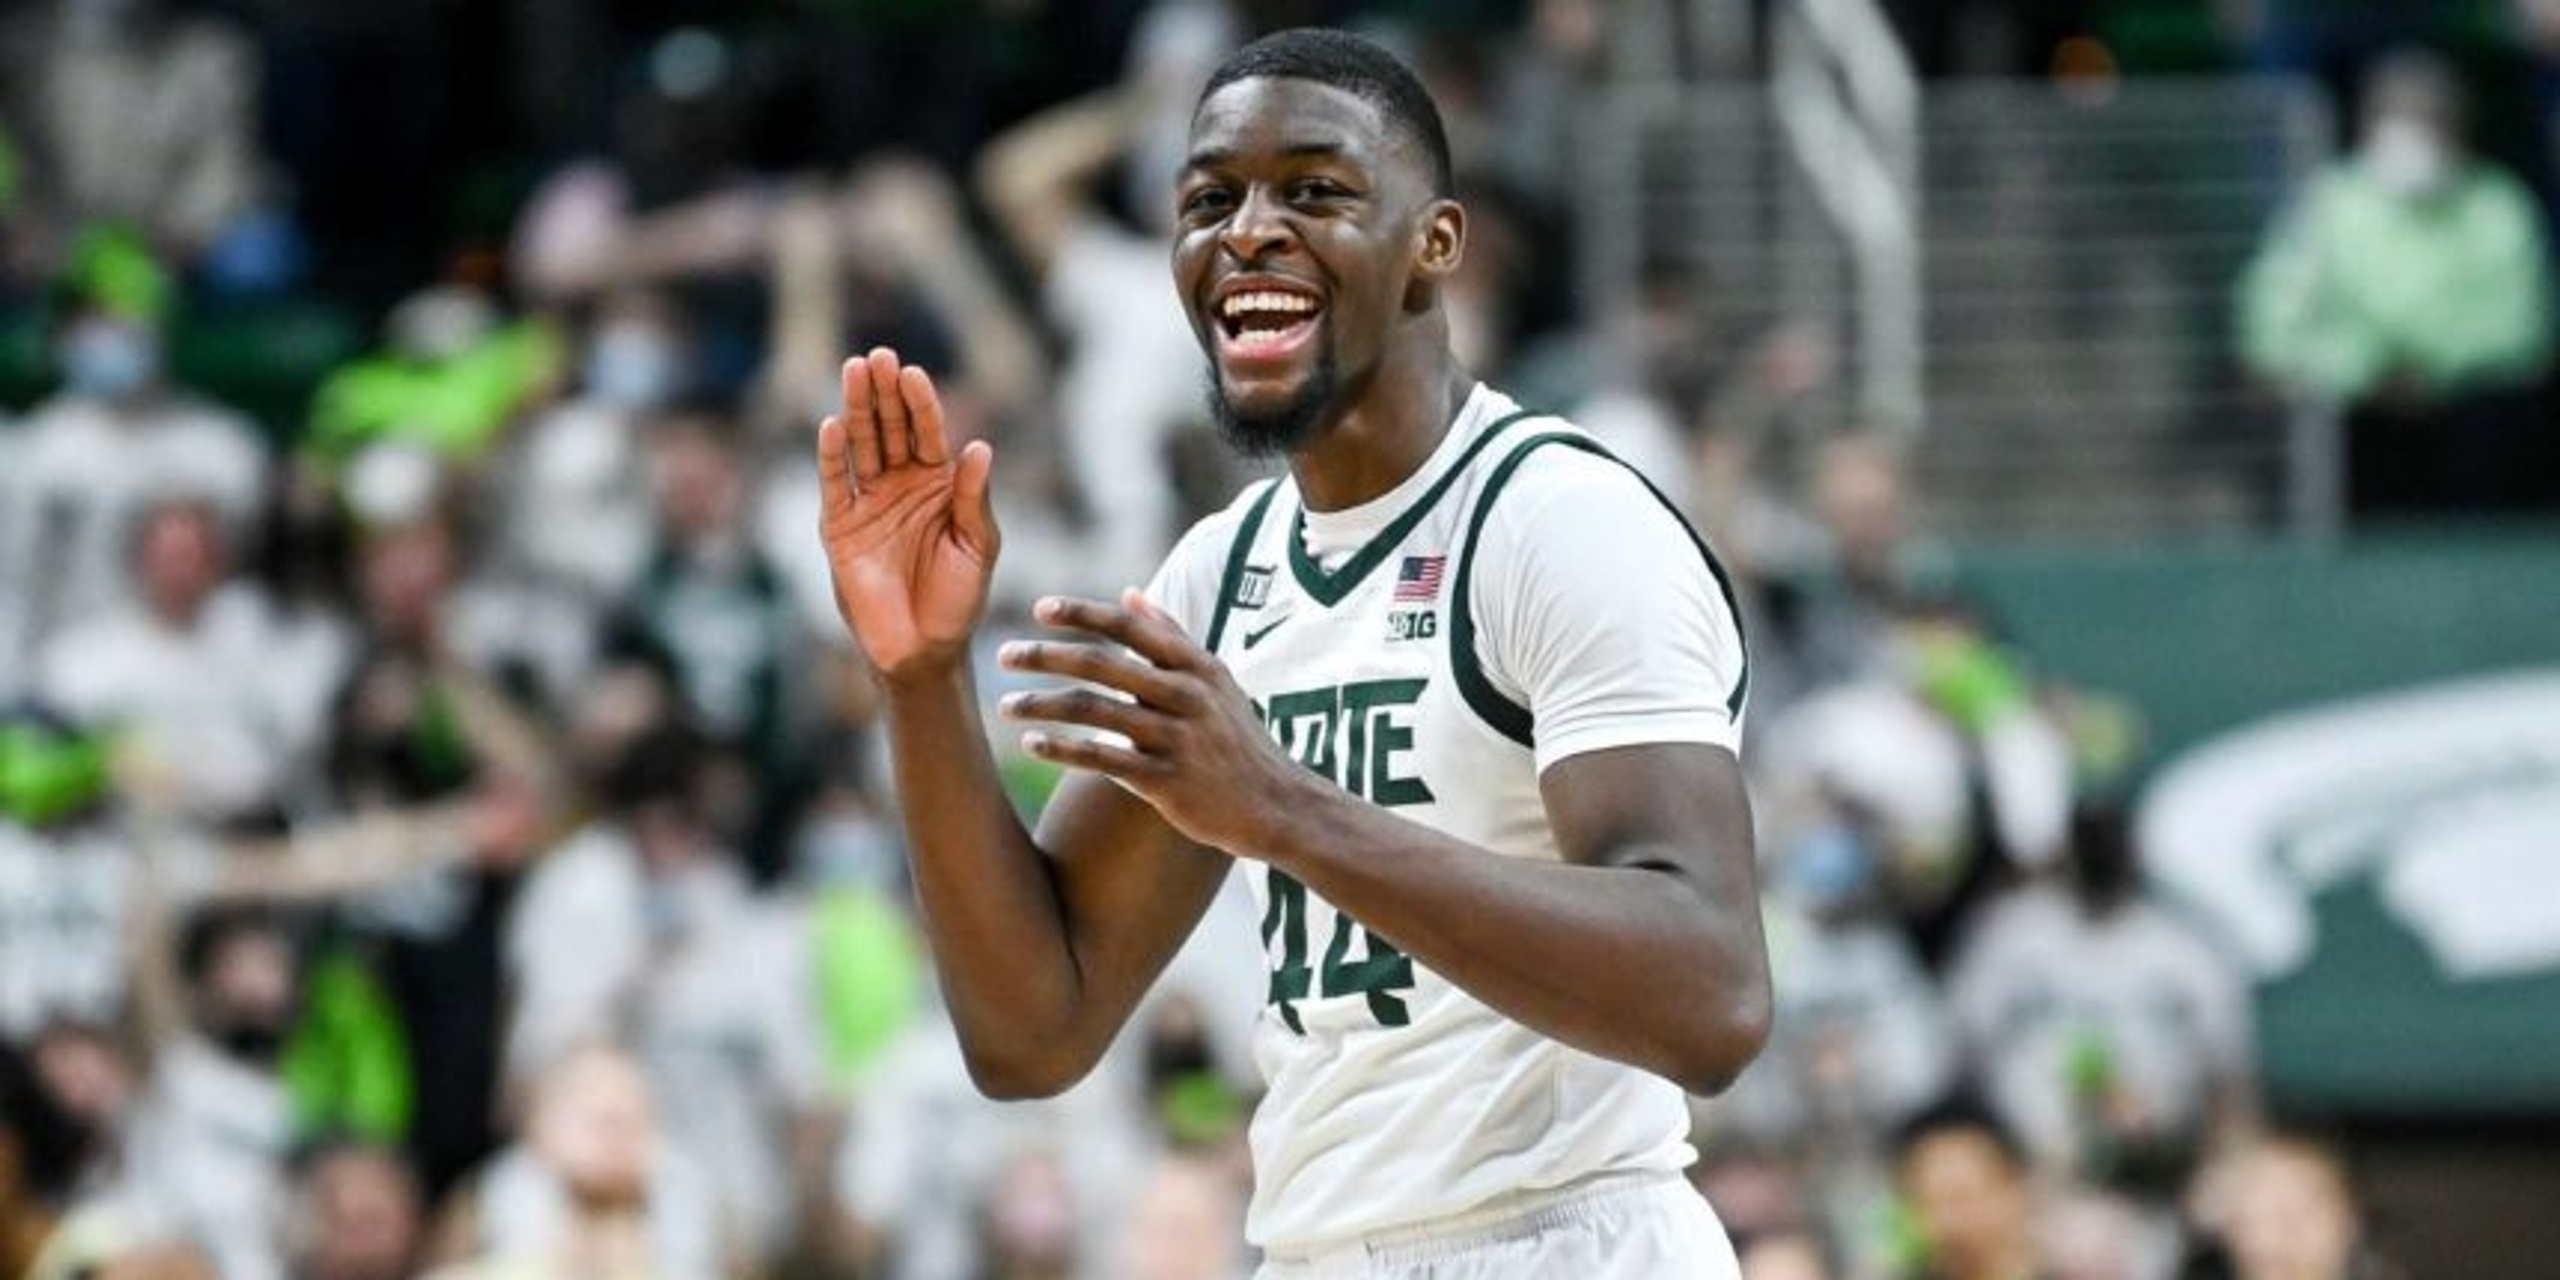 2022 NBA Draft: Michigan State's Gabe Brown knows his role